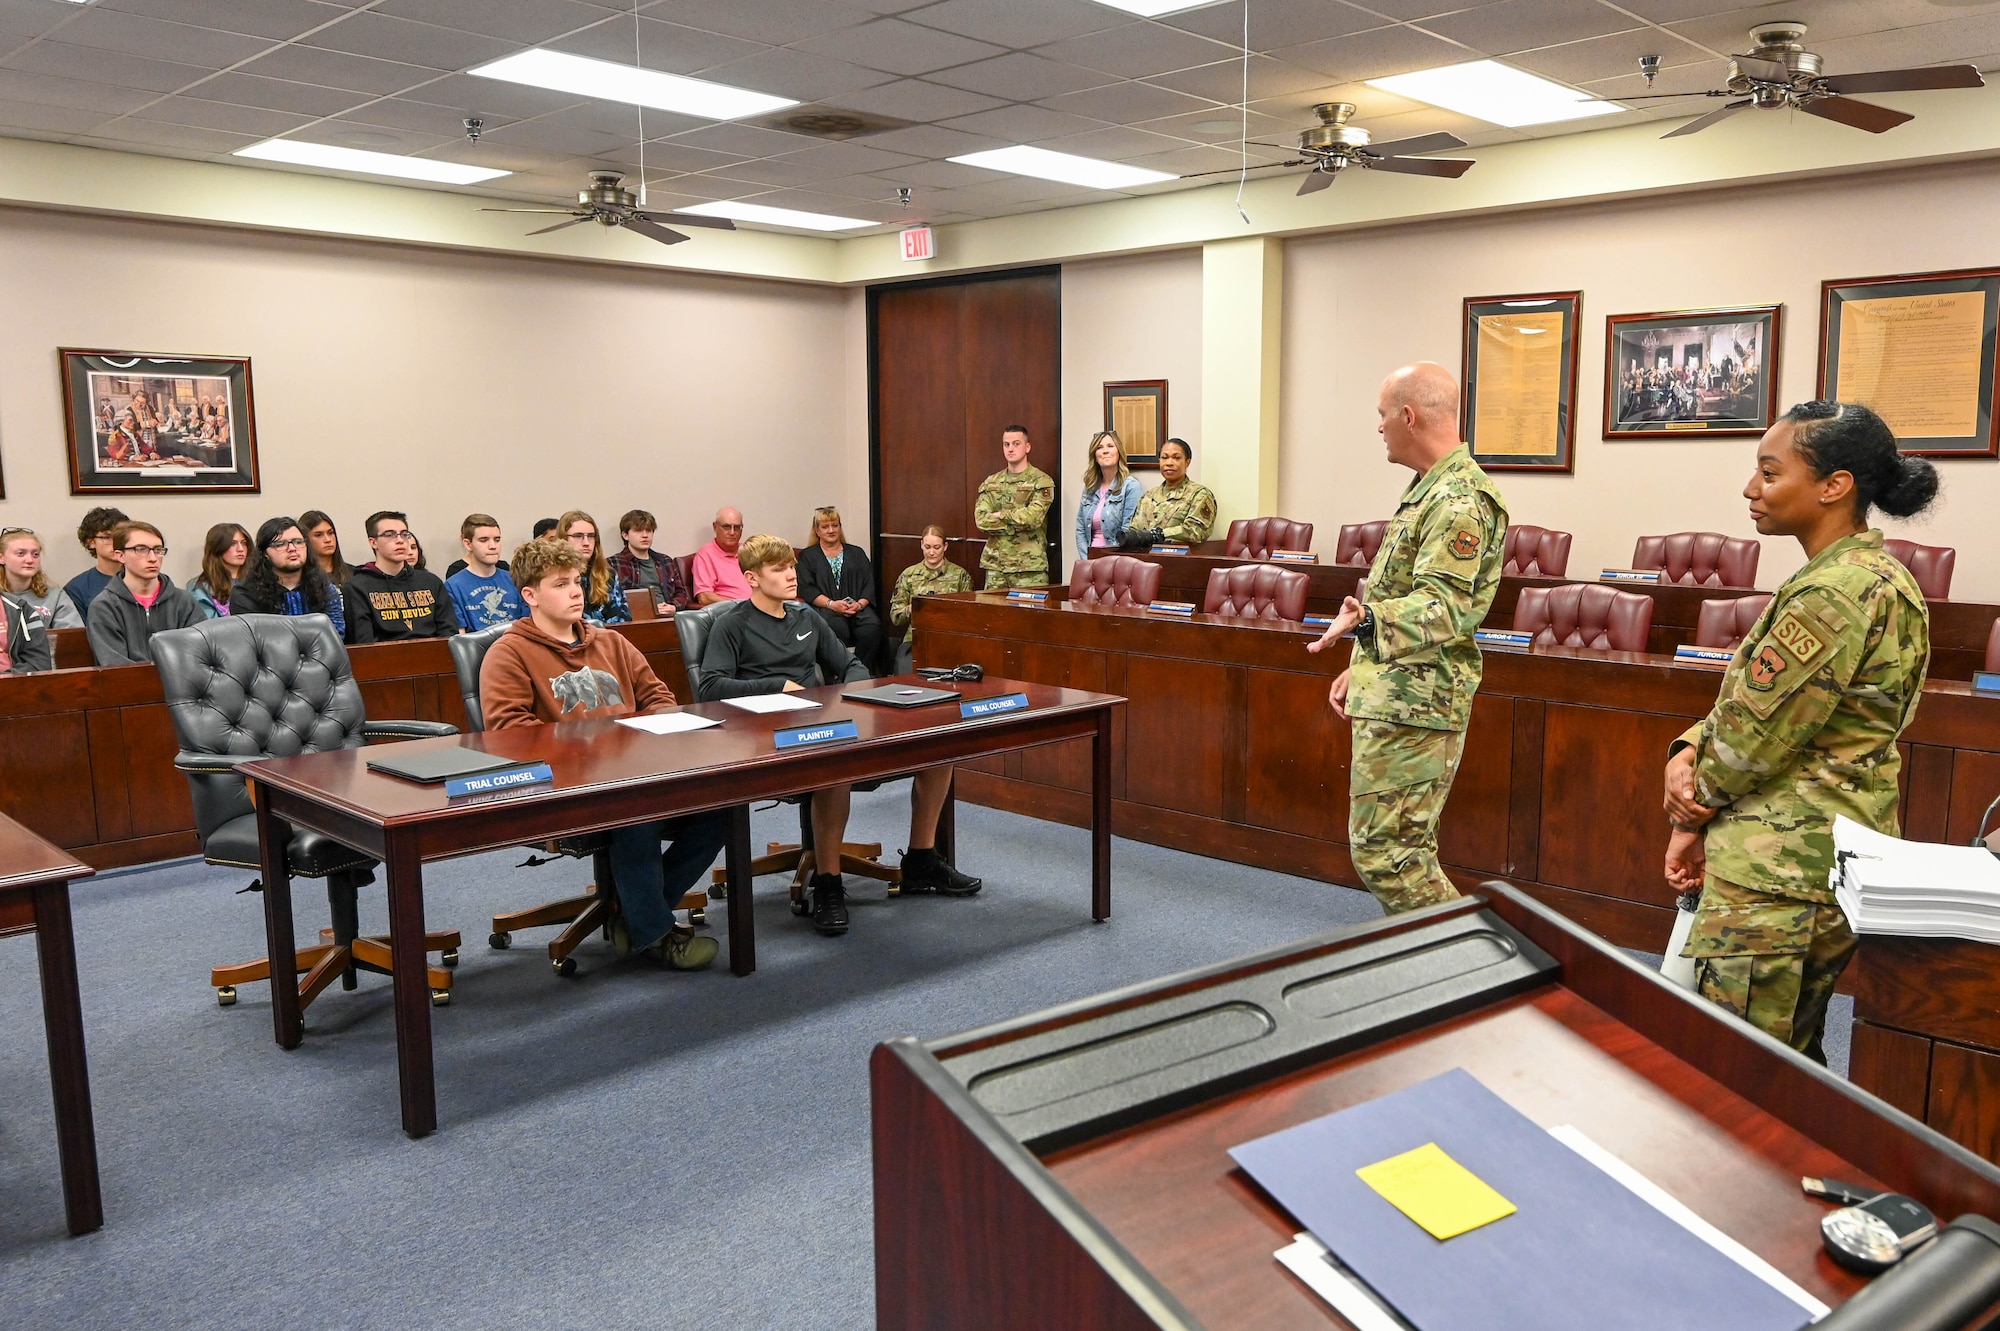 U.S. Air Force Col. Blaine Baker, 97th Air Mobility Wing commander, addresses students from Altus High School during a National Law Day mock trial at Altus Air Force Base (AFB), Oklahoma, May 1, 2023. Almost half of the students that participated in the mock trial had a connection to Altus AFB. (U.S. Air Force photo by Senior Airman Trenton Jancze)